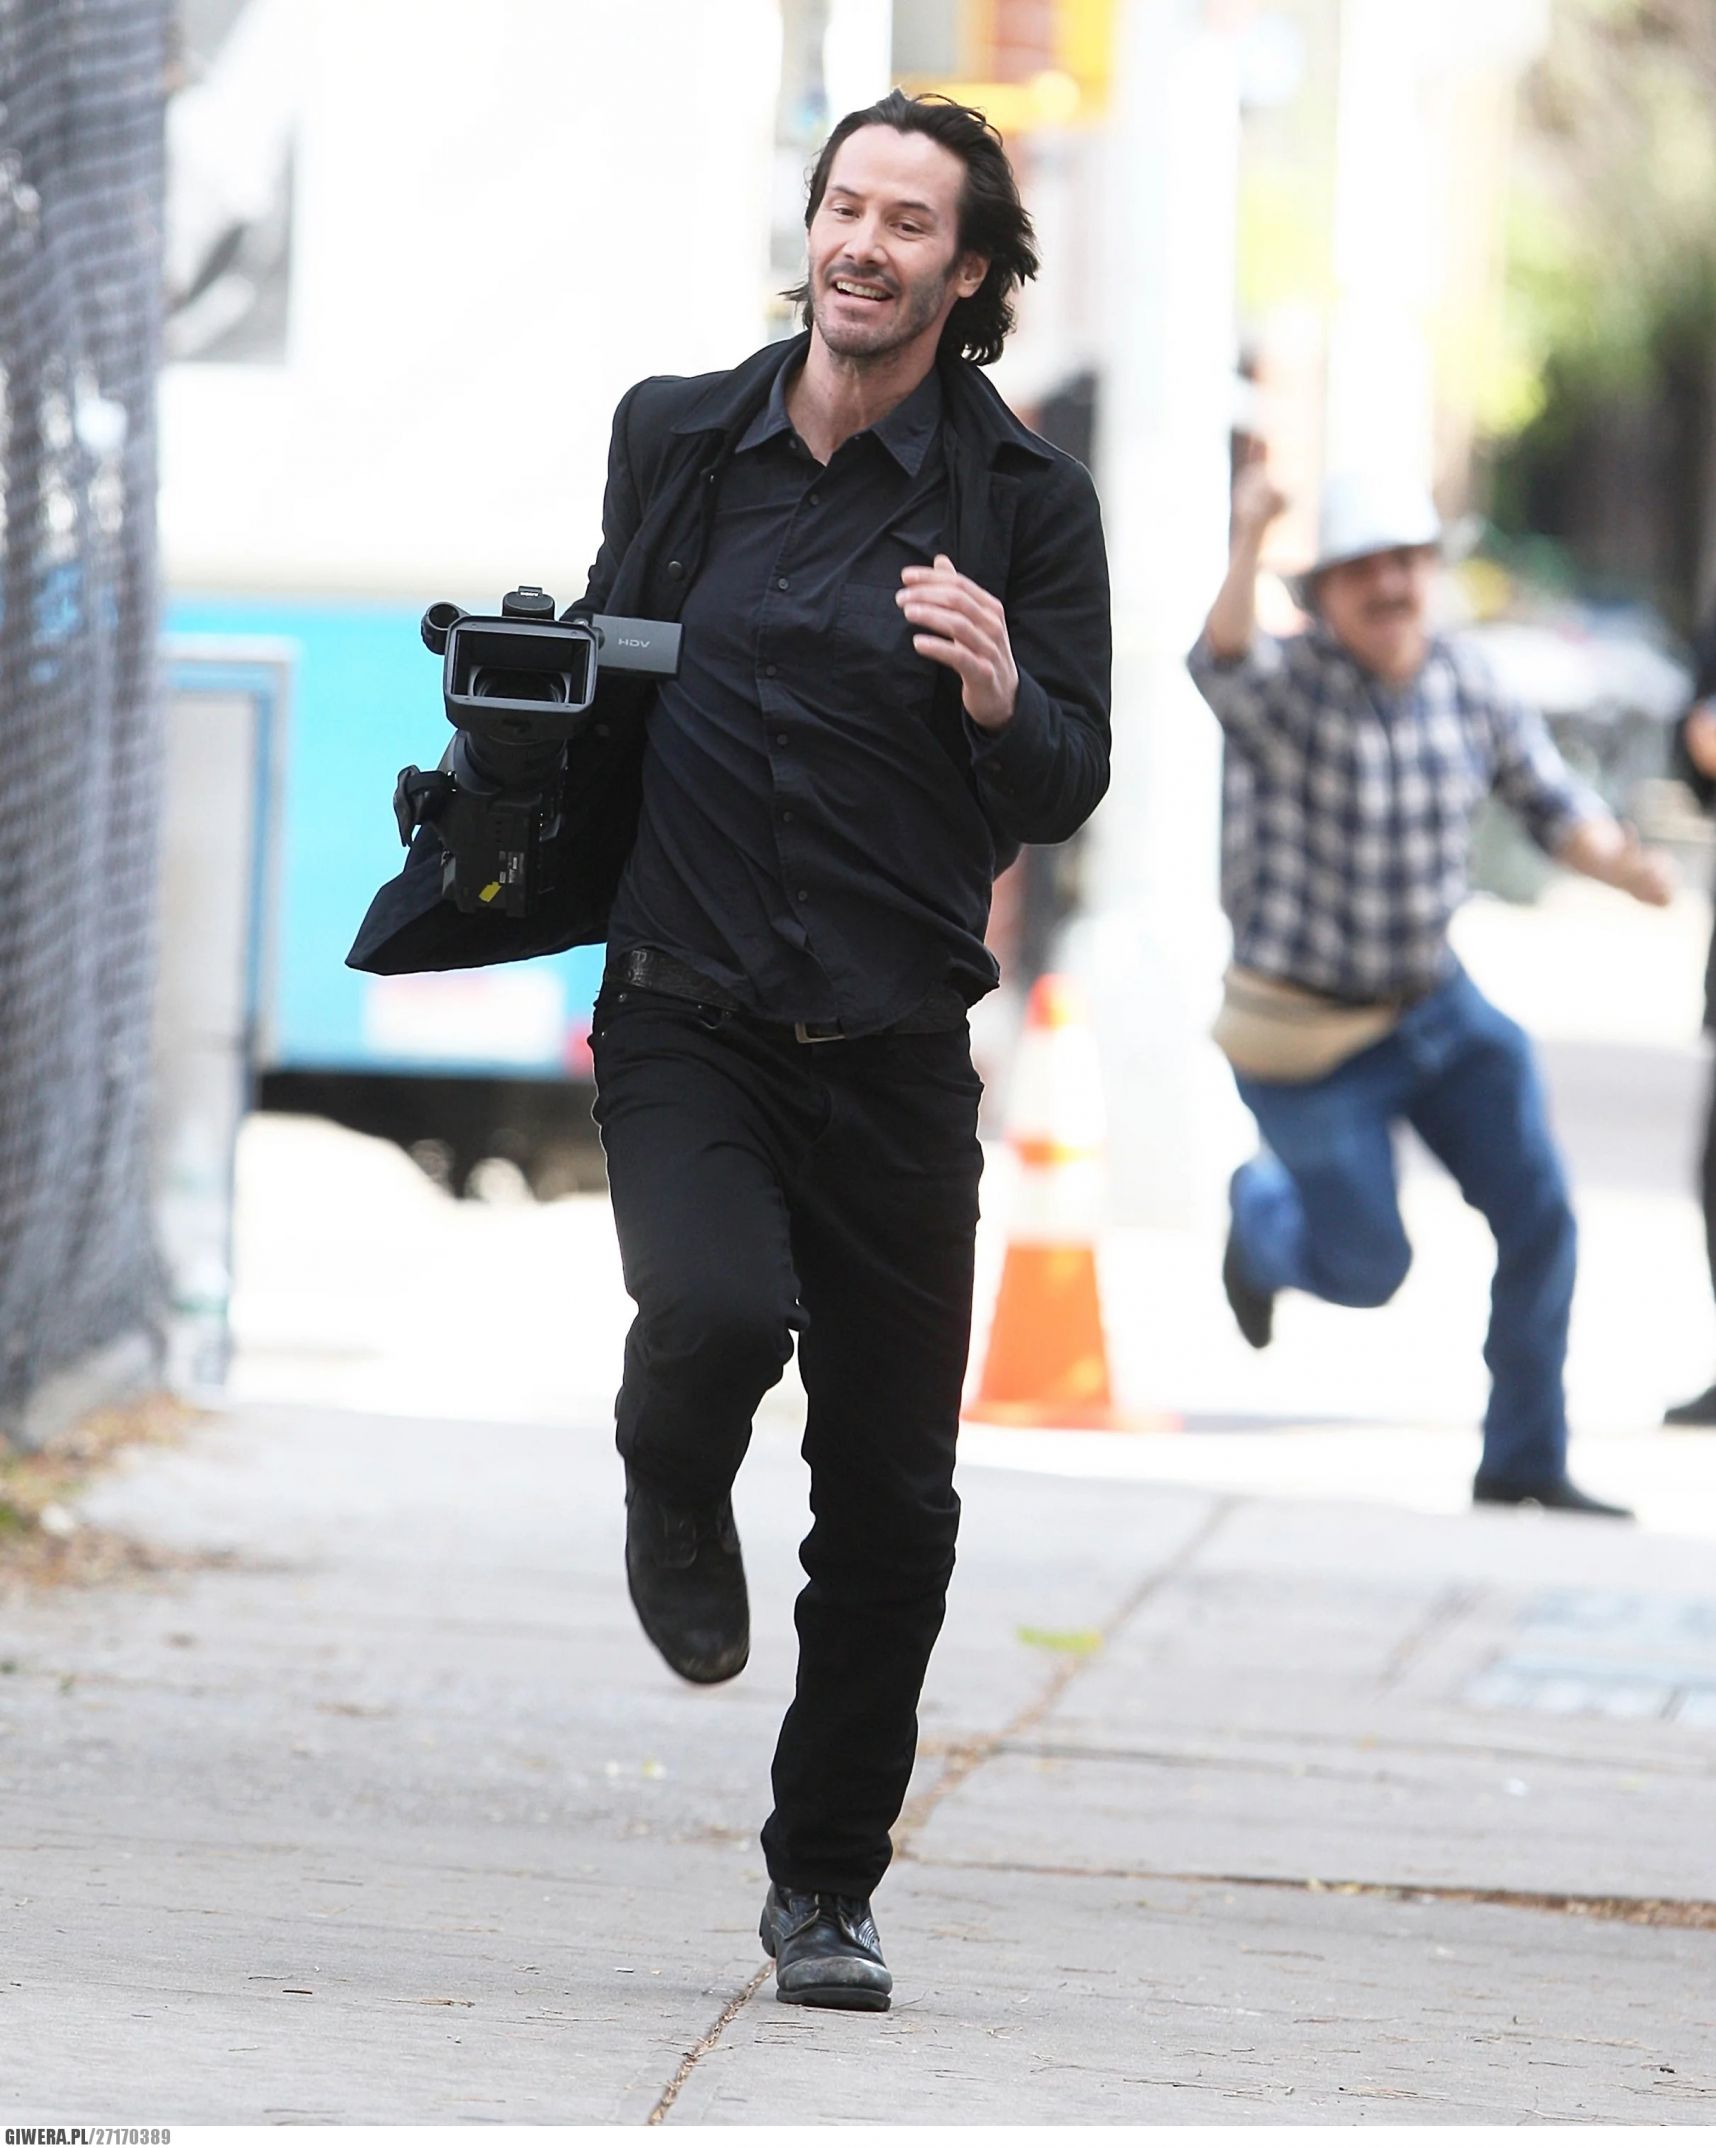 Keanu Reeves running from paparazzi Blank Meme Template